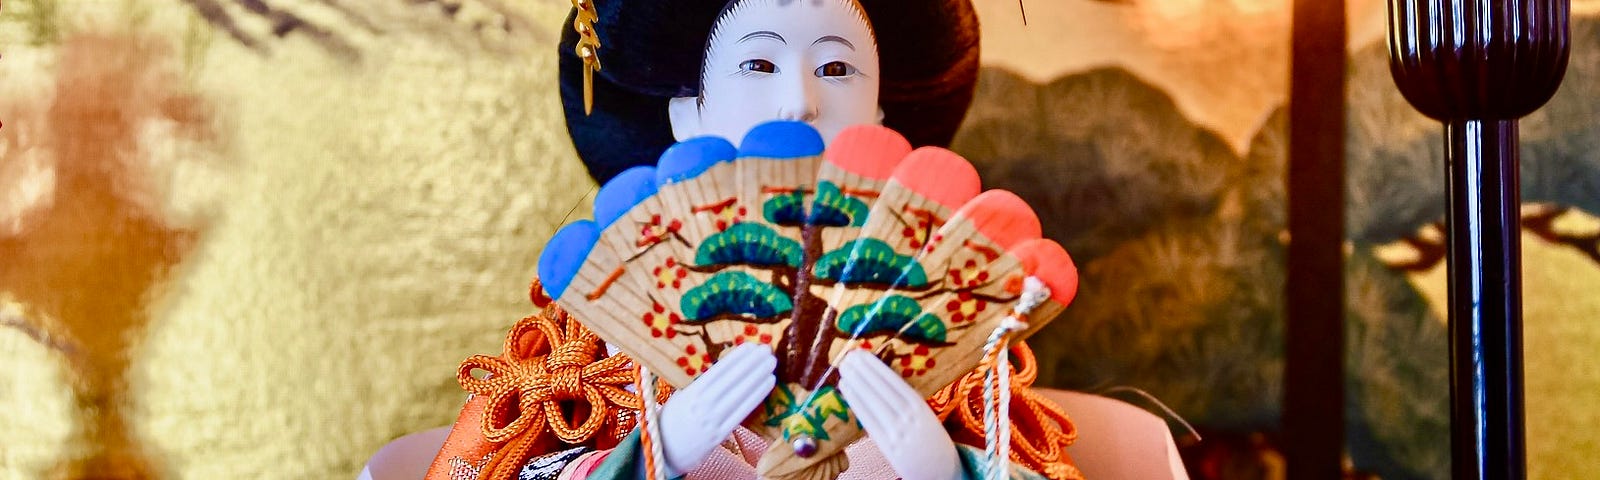 Empress Hina doll, face partially covered by a folding fan she is holding.